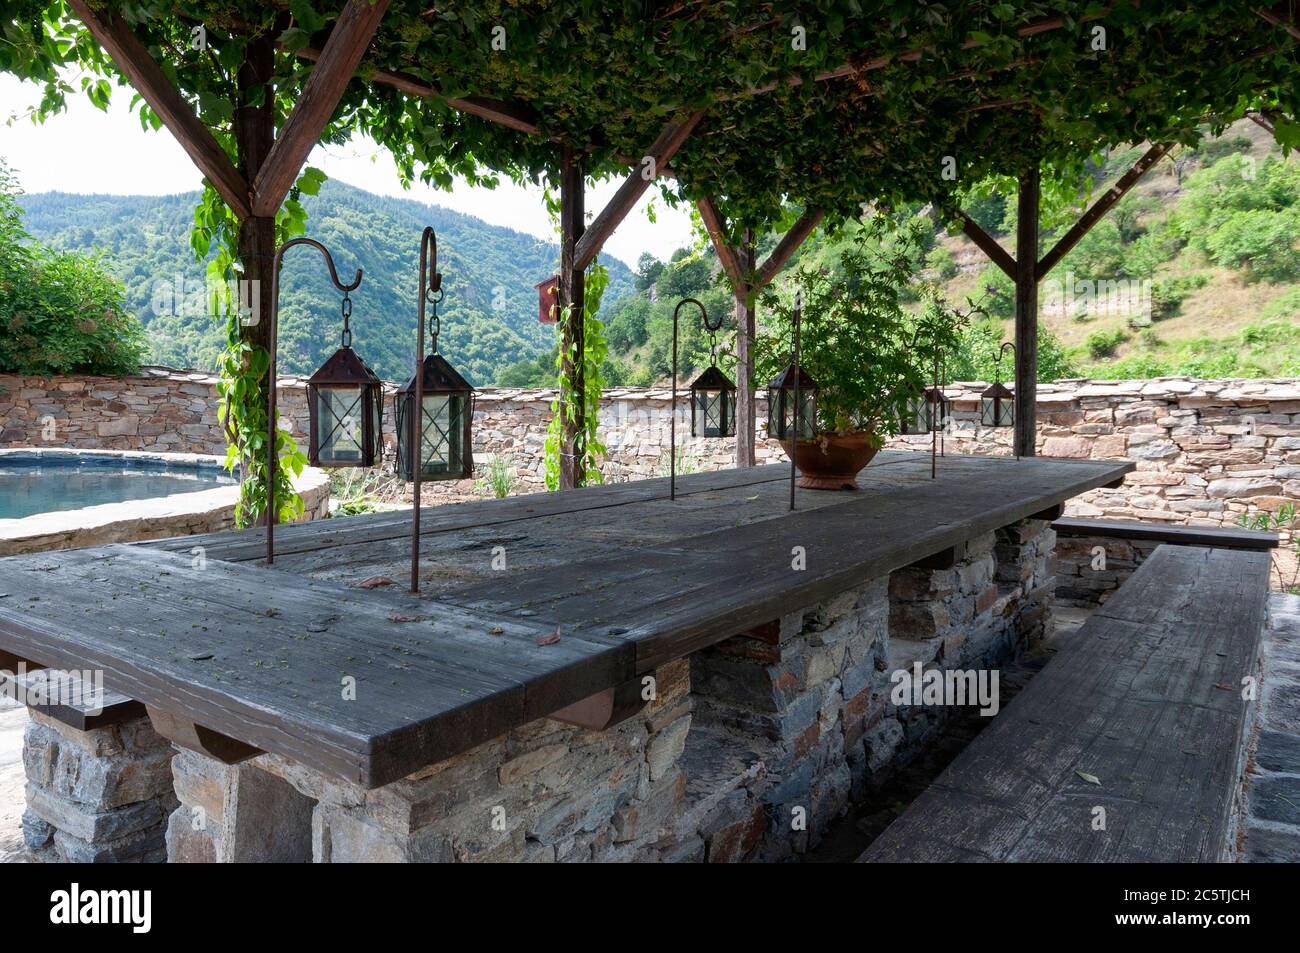 Dining and sitting area under pergola at romantic outdoor backyard space and unique patio of an old 19th century traditional Bulgarian timber house as an example of typical architecture style in the Rhodope Mountains on the Balkan Peninsula in Southeastern Europe Stock Photo